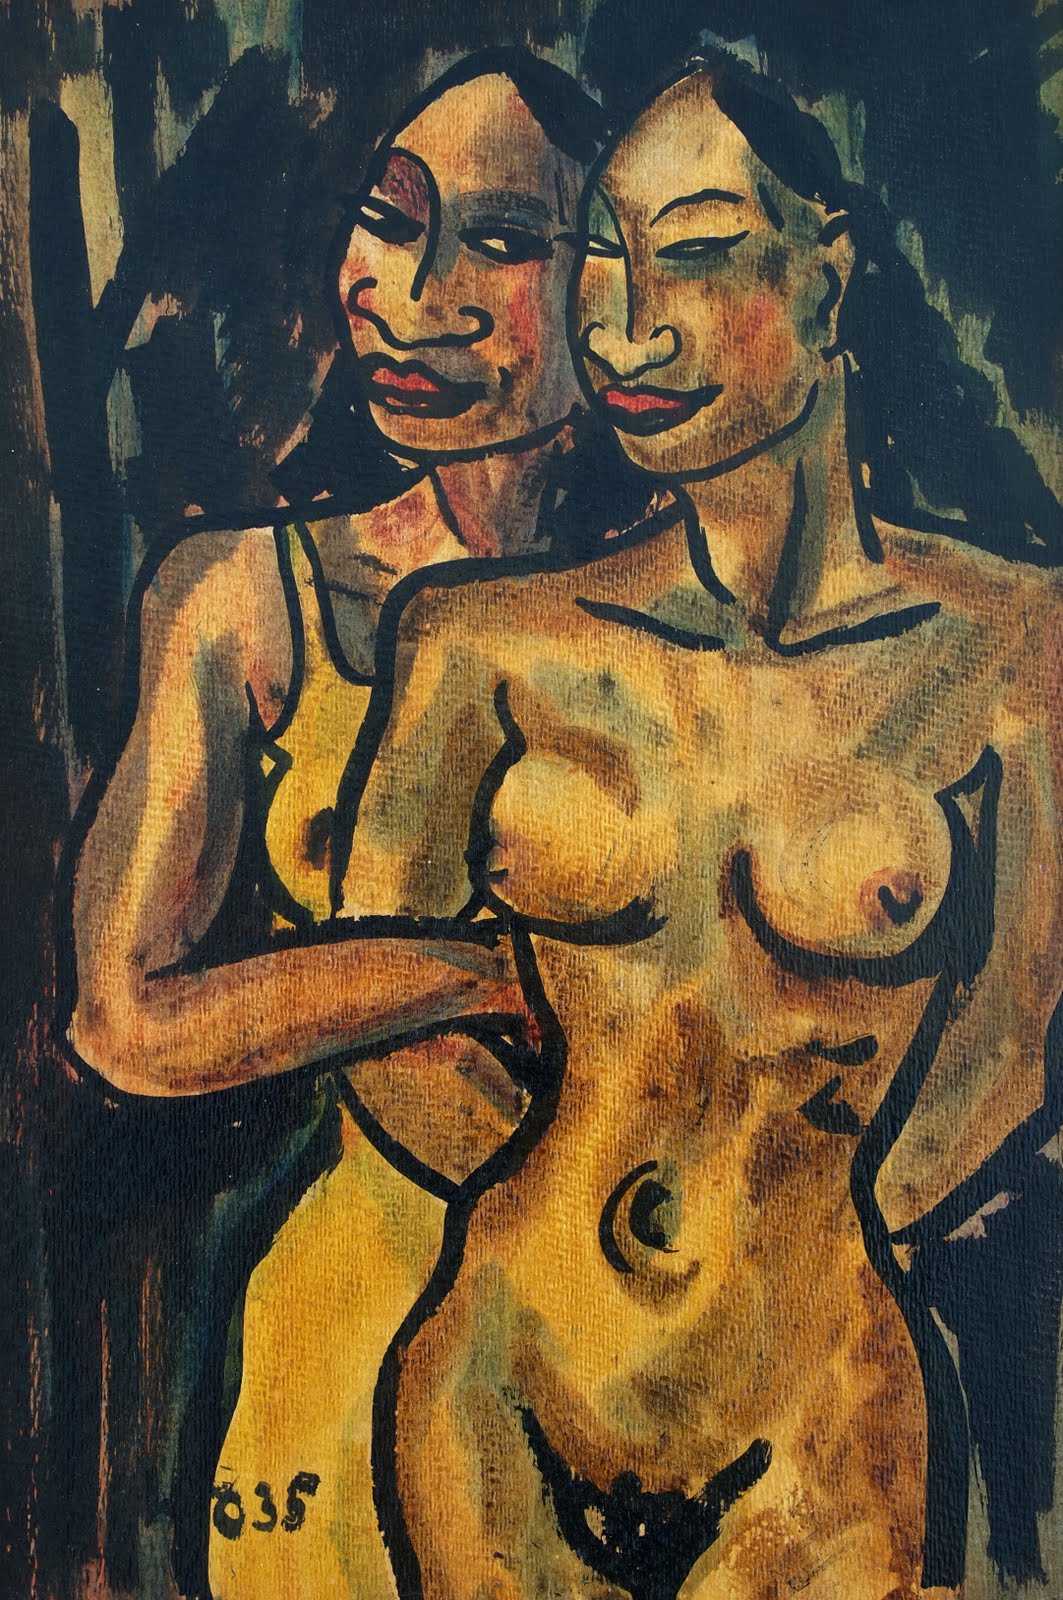 Nudes, oil on wood, 1935, 49 x 33 cm, family-owned